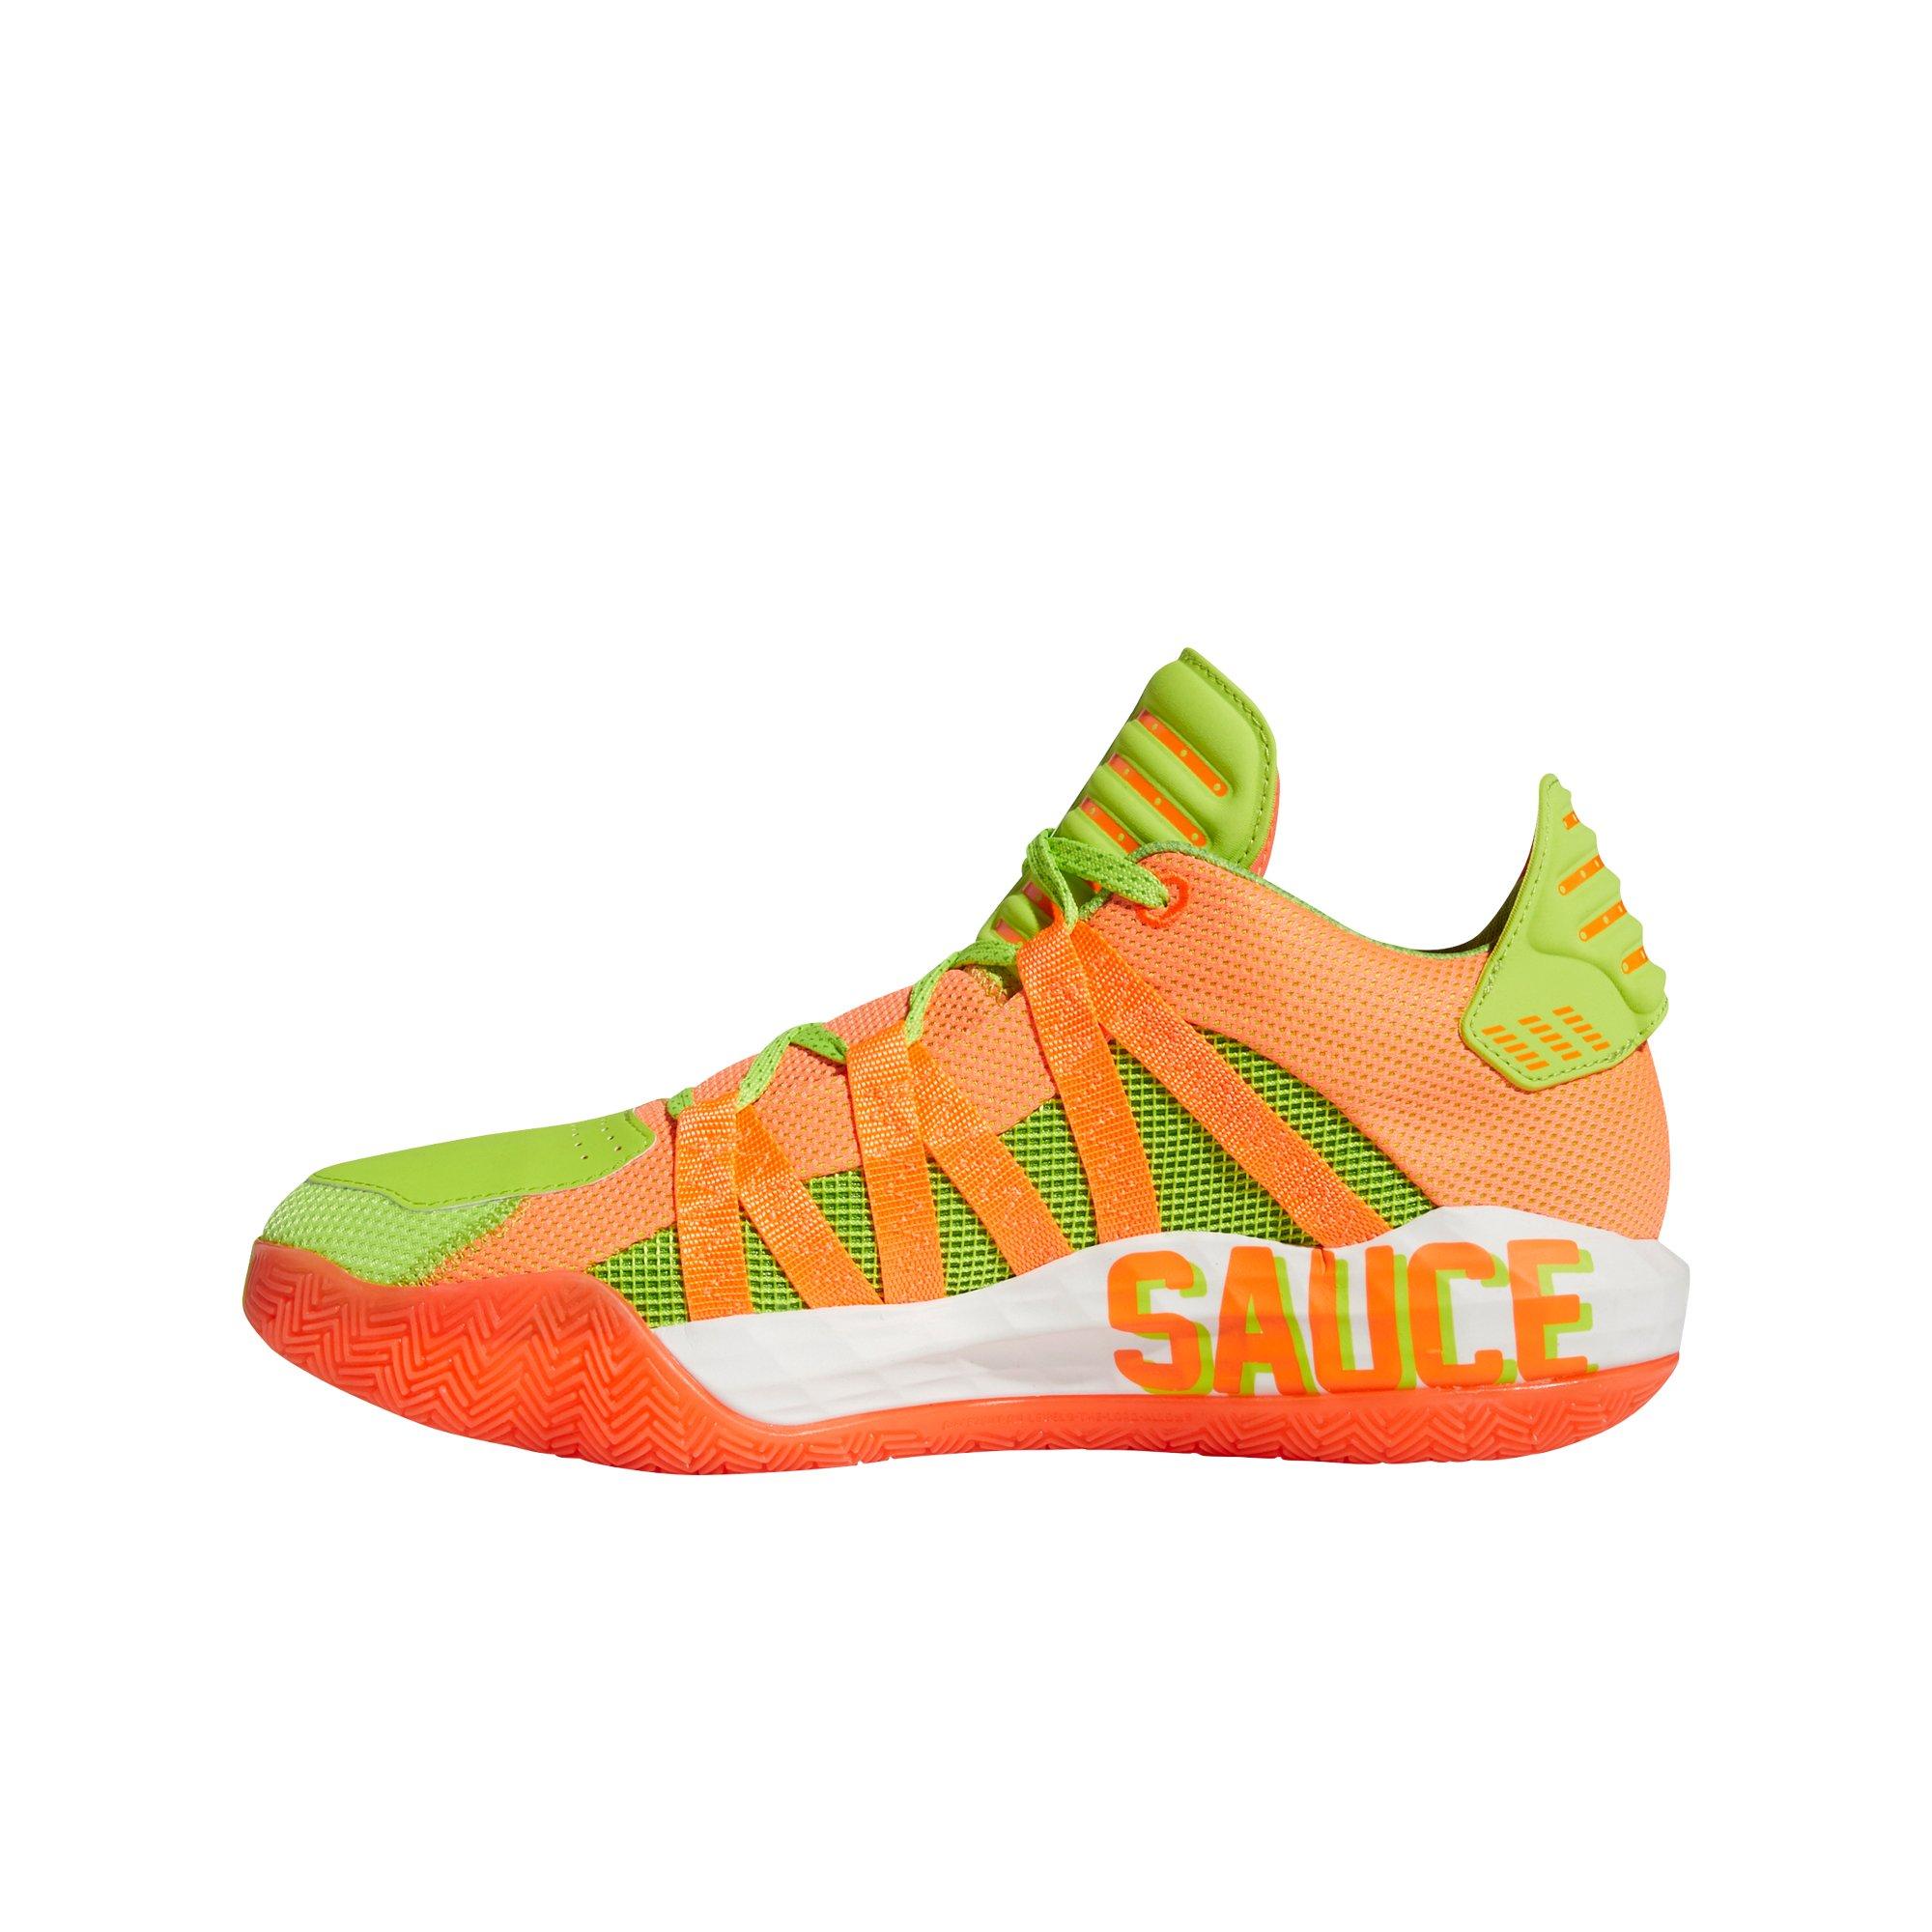 dame sauce shoes